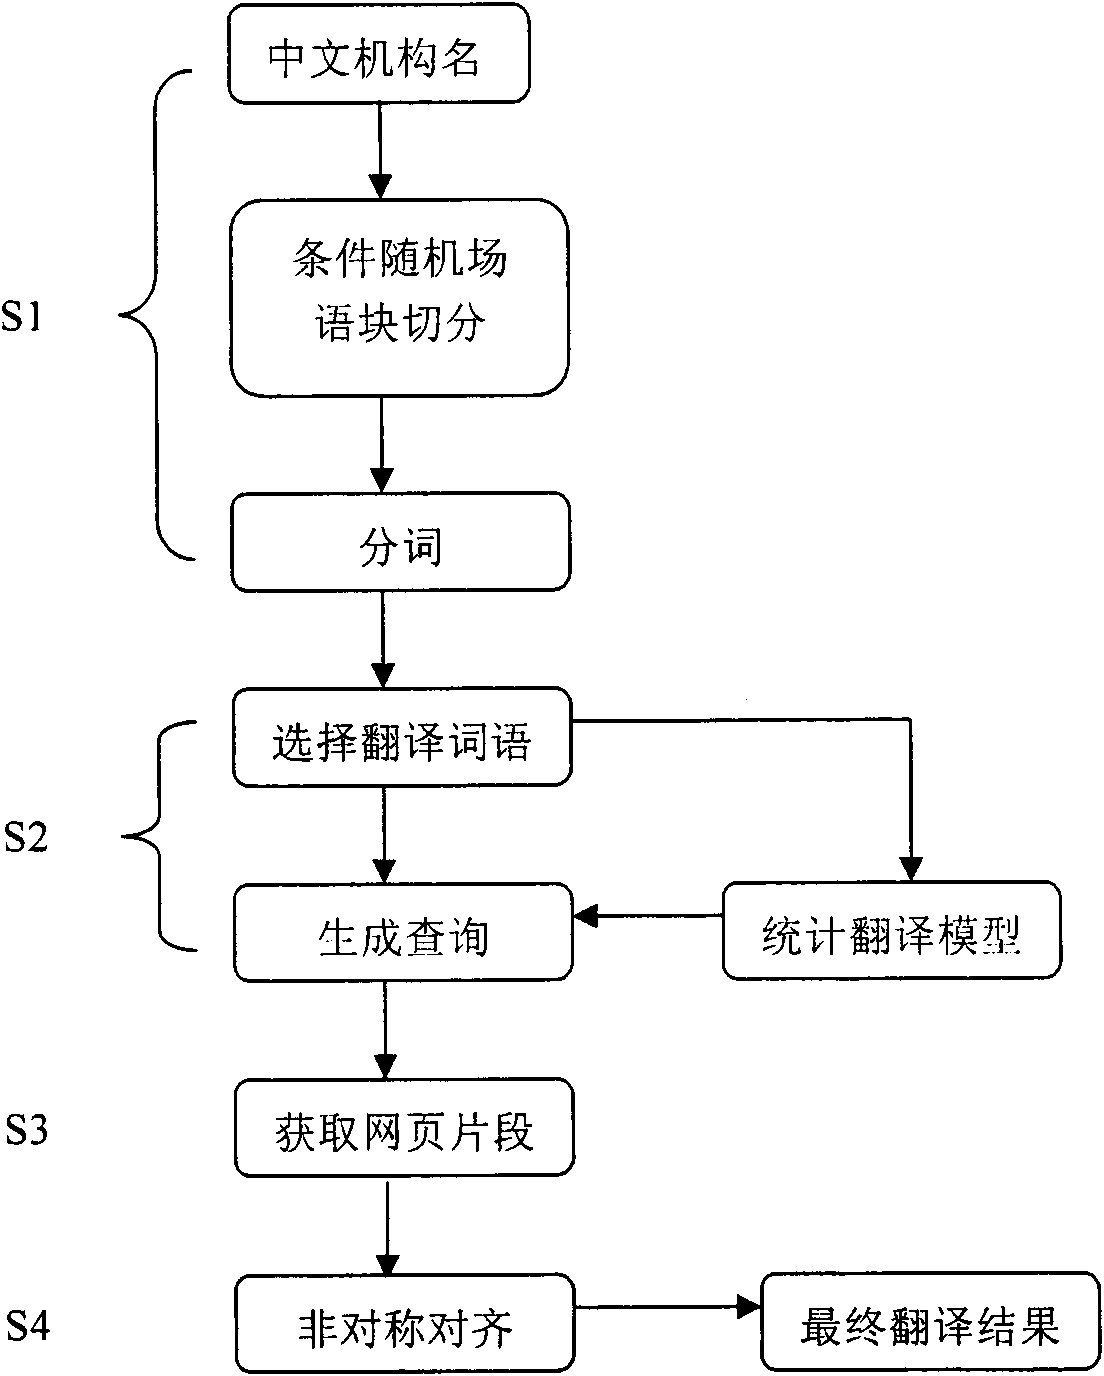 Method and device for translating Chinese organization name into English with the aid of network knowledge